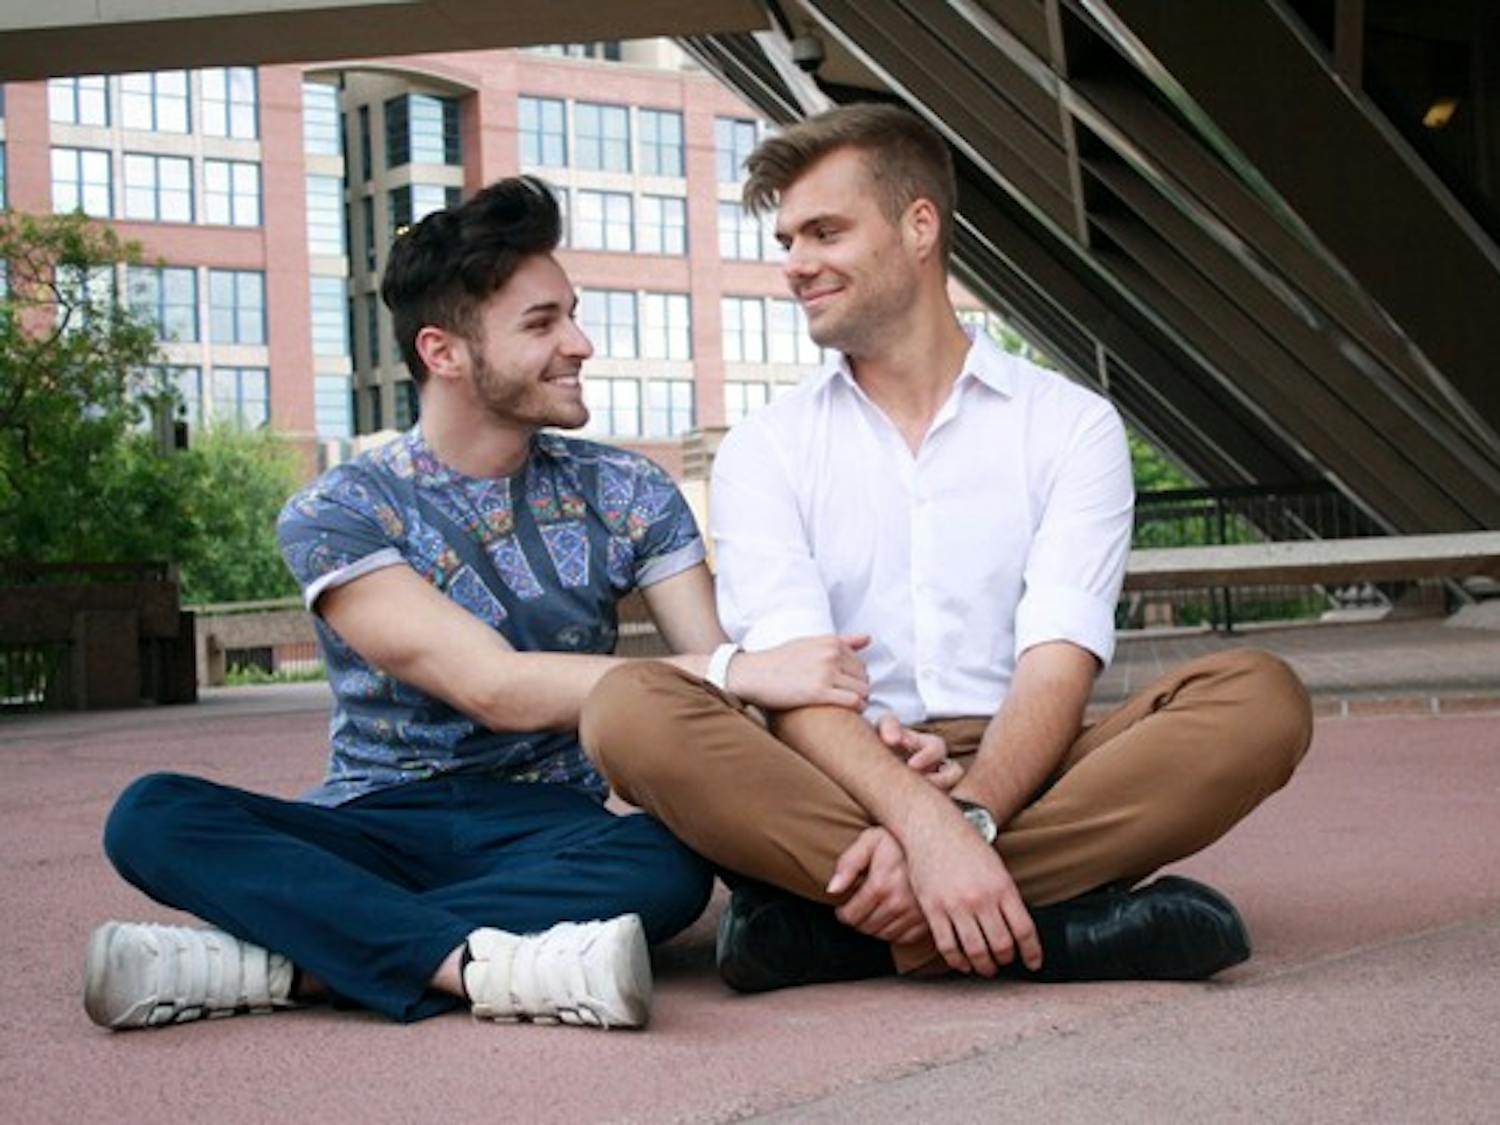 Juniors Alexander Mach (right) and Michael Howard sit outside of the Tempe City Hall Building. The City of Tempe has expressed interest in legalizing civil unions, and although Mach and Howard’s relationship is fairly new, they say they are excited by the city’s progressive attitude toward gay rights. (Photo by Hector Salas Almeida)